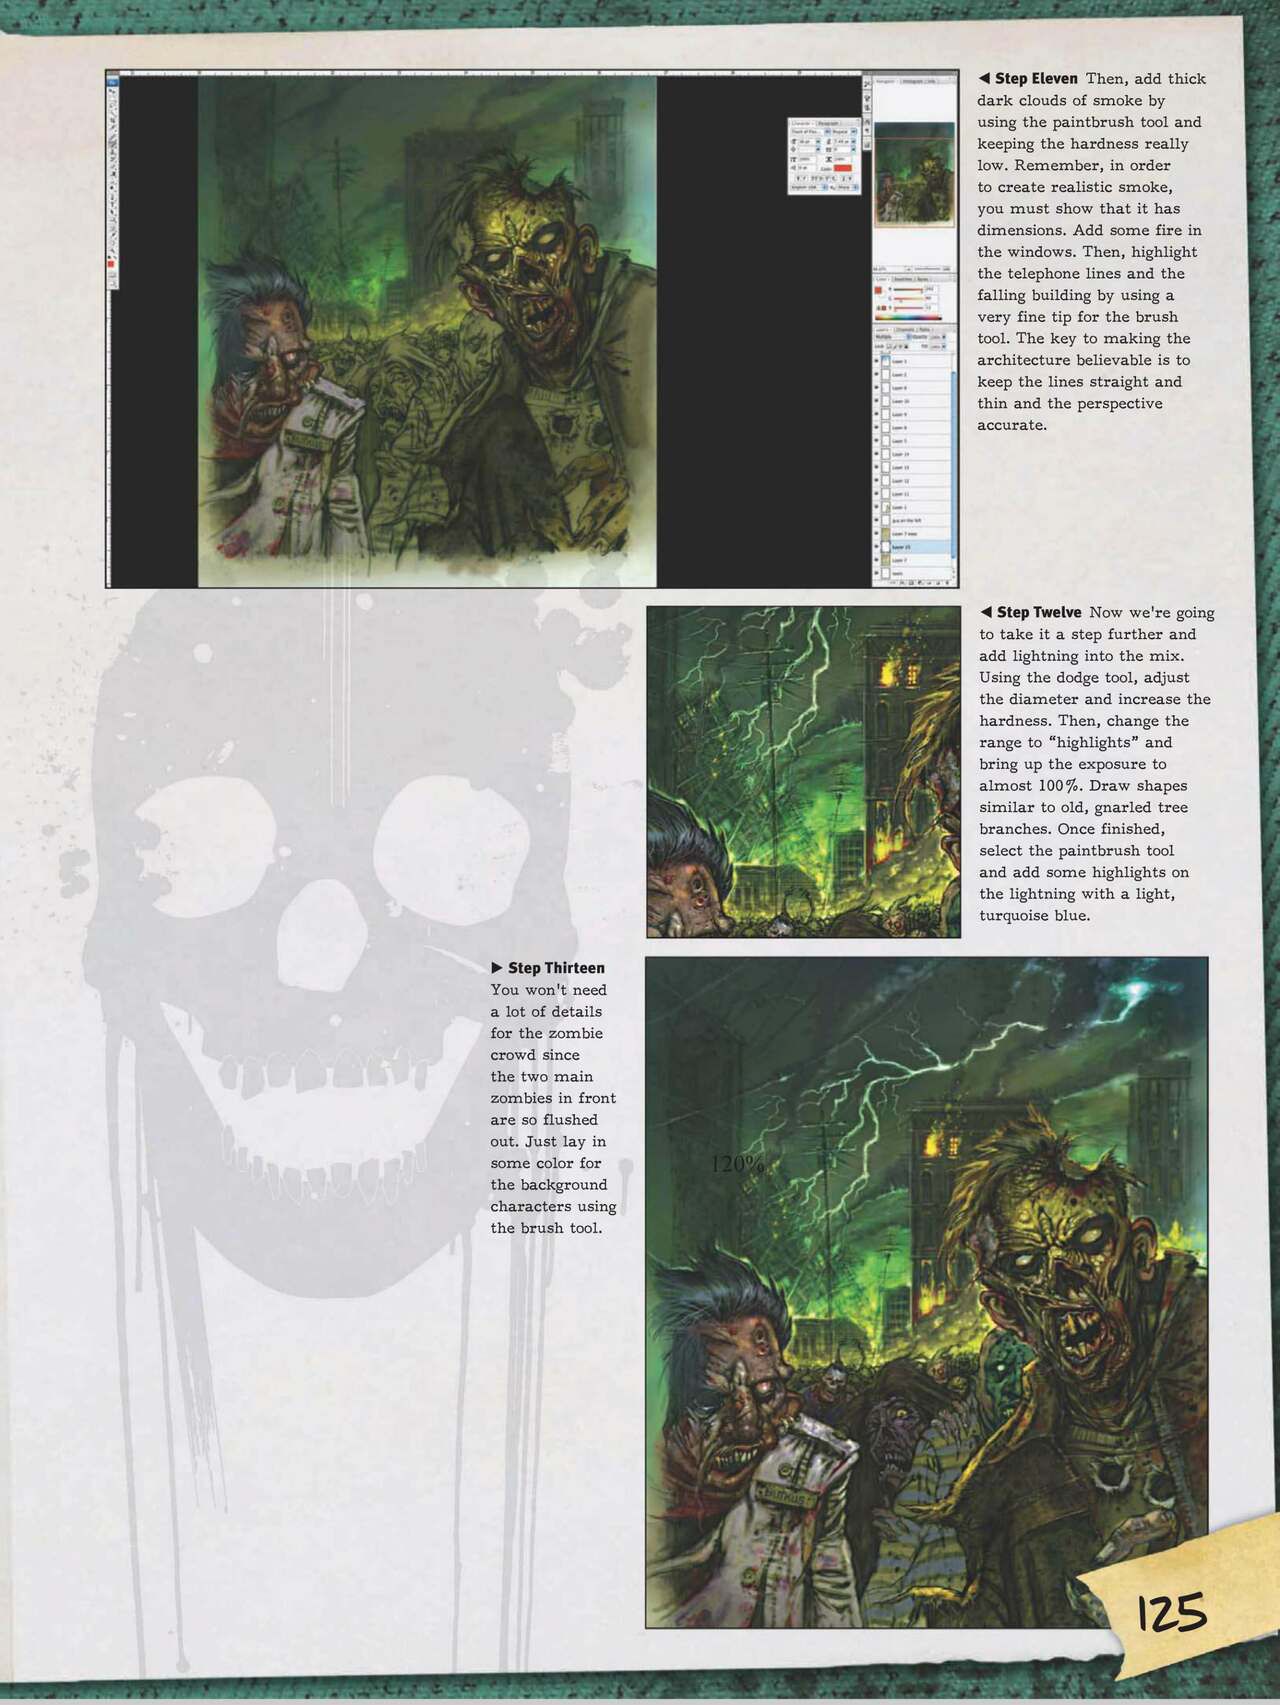 How to Draw Zombies: Discover the secrets to drawing, painting, and illustrating the undead 僵尸描绘集 126